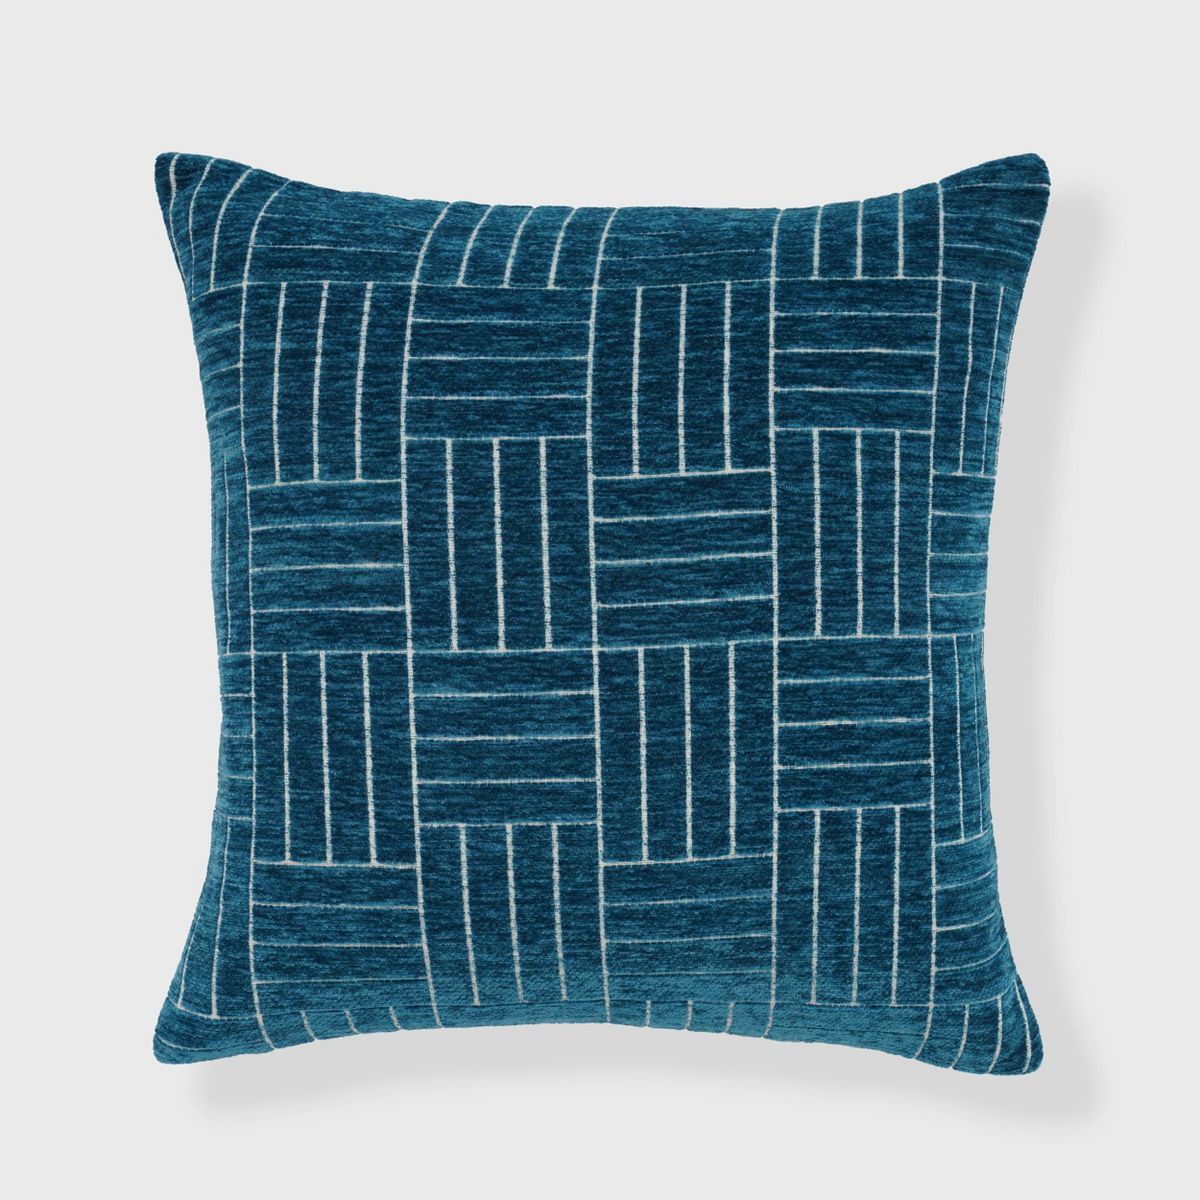 Staggered Striped Chenille Woven Jacquard Square Throw Pillow - freshmint | Target